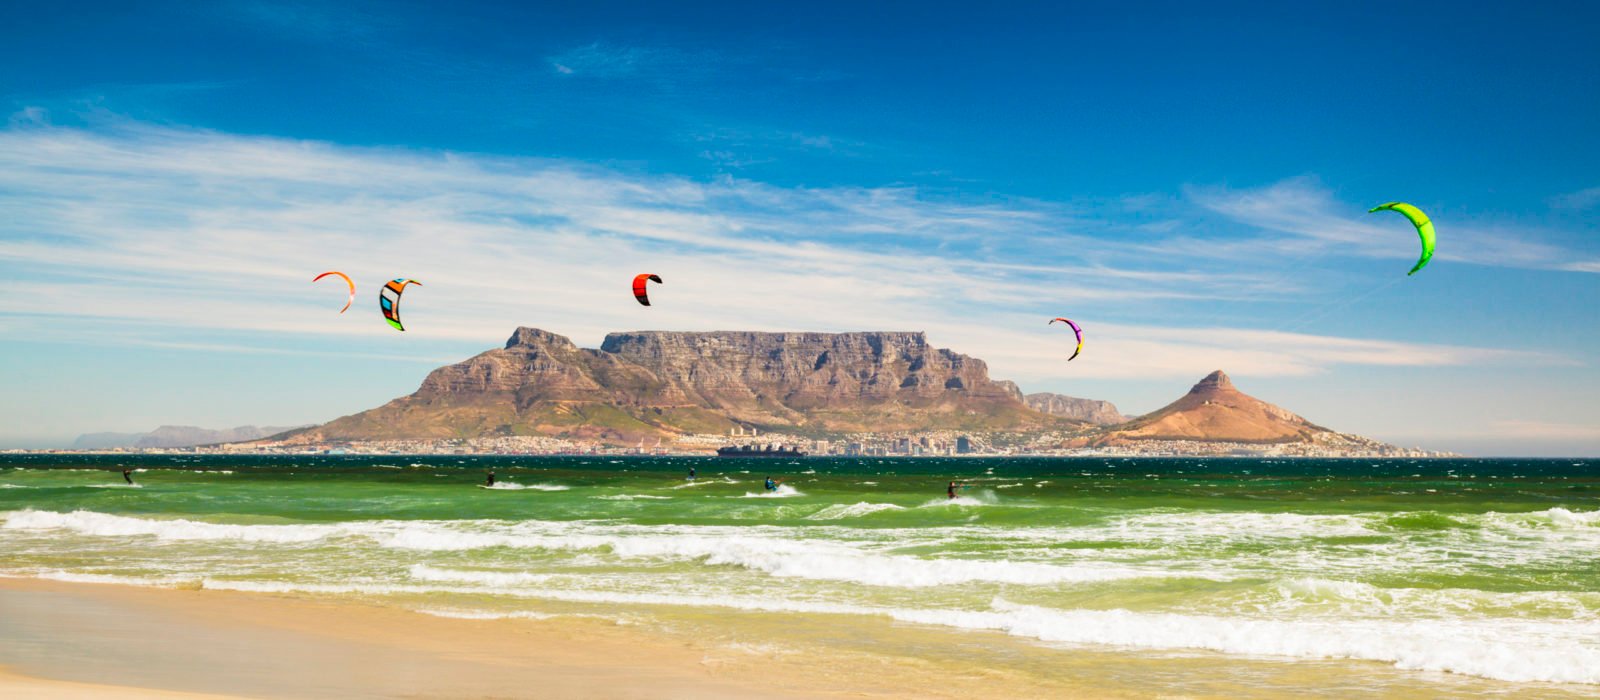 Kiteboarding near Table Mountain and Cape Town in South Africa